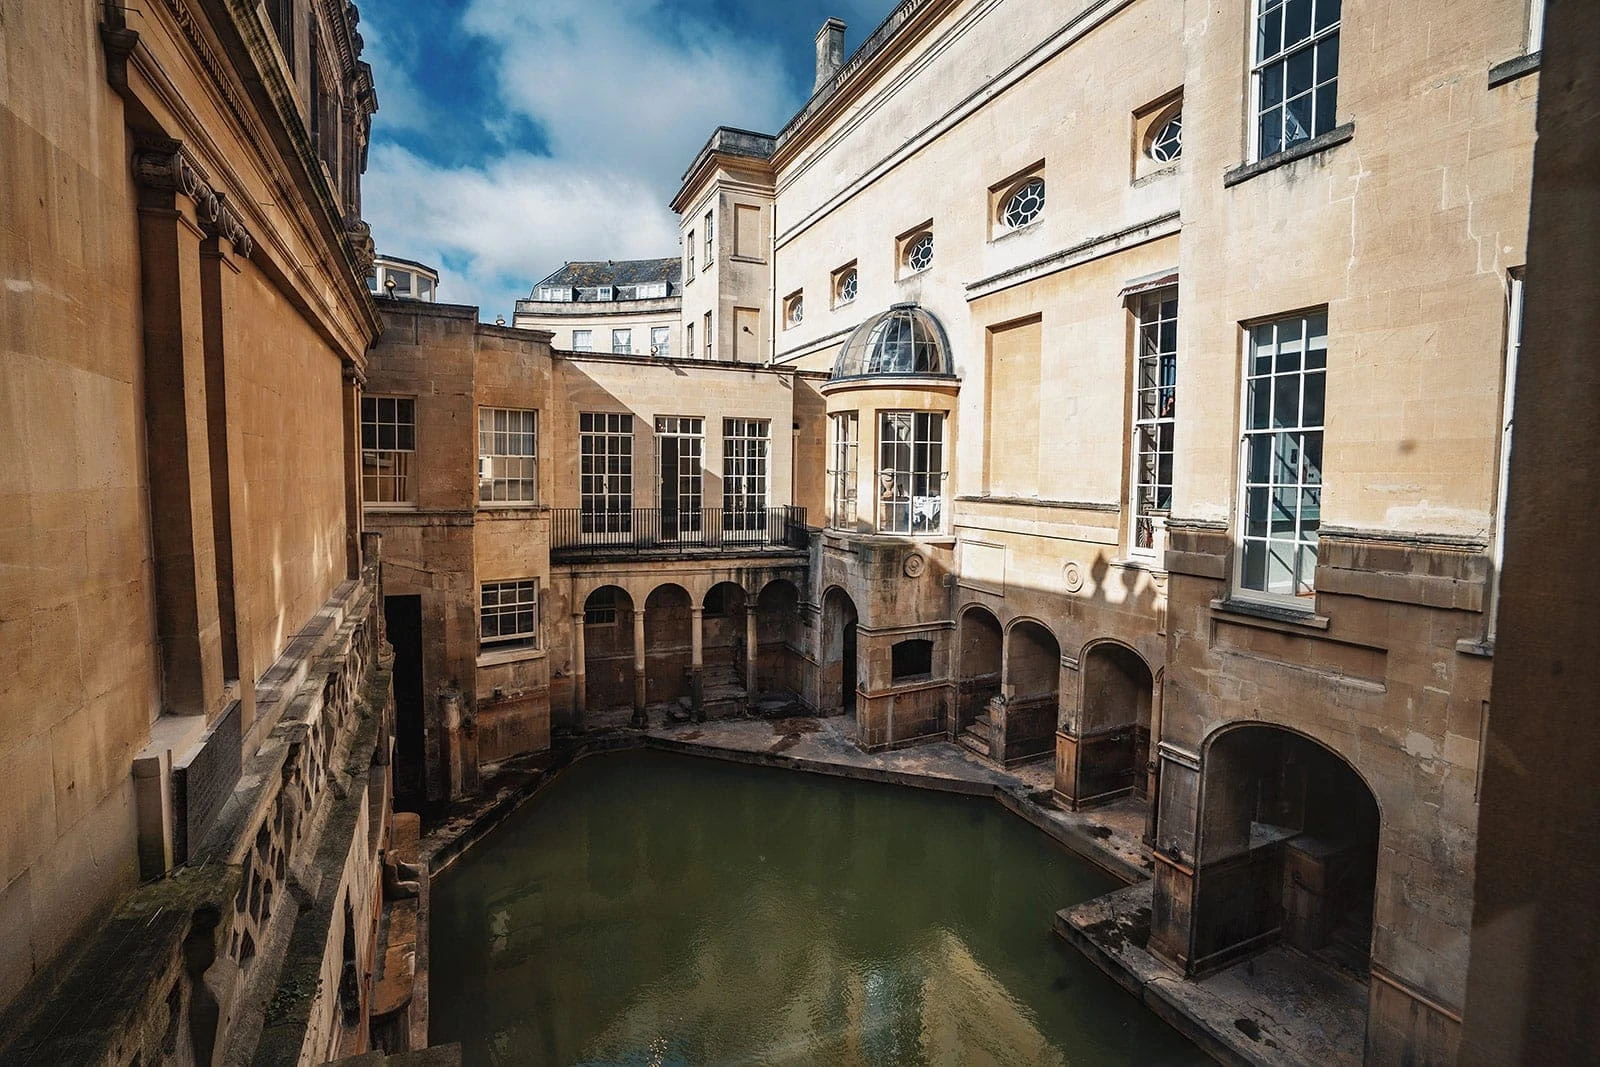 Bath UK : Things to do on a perfect day trip!